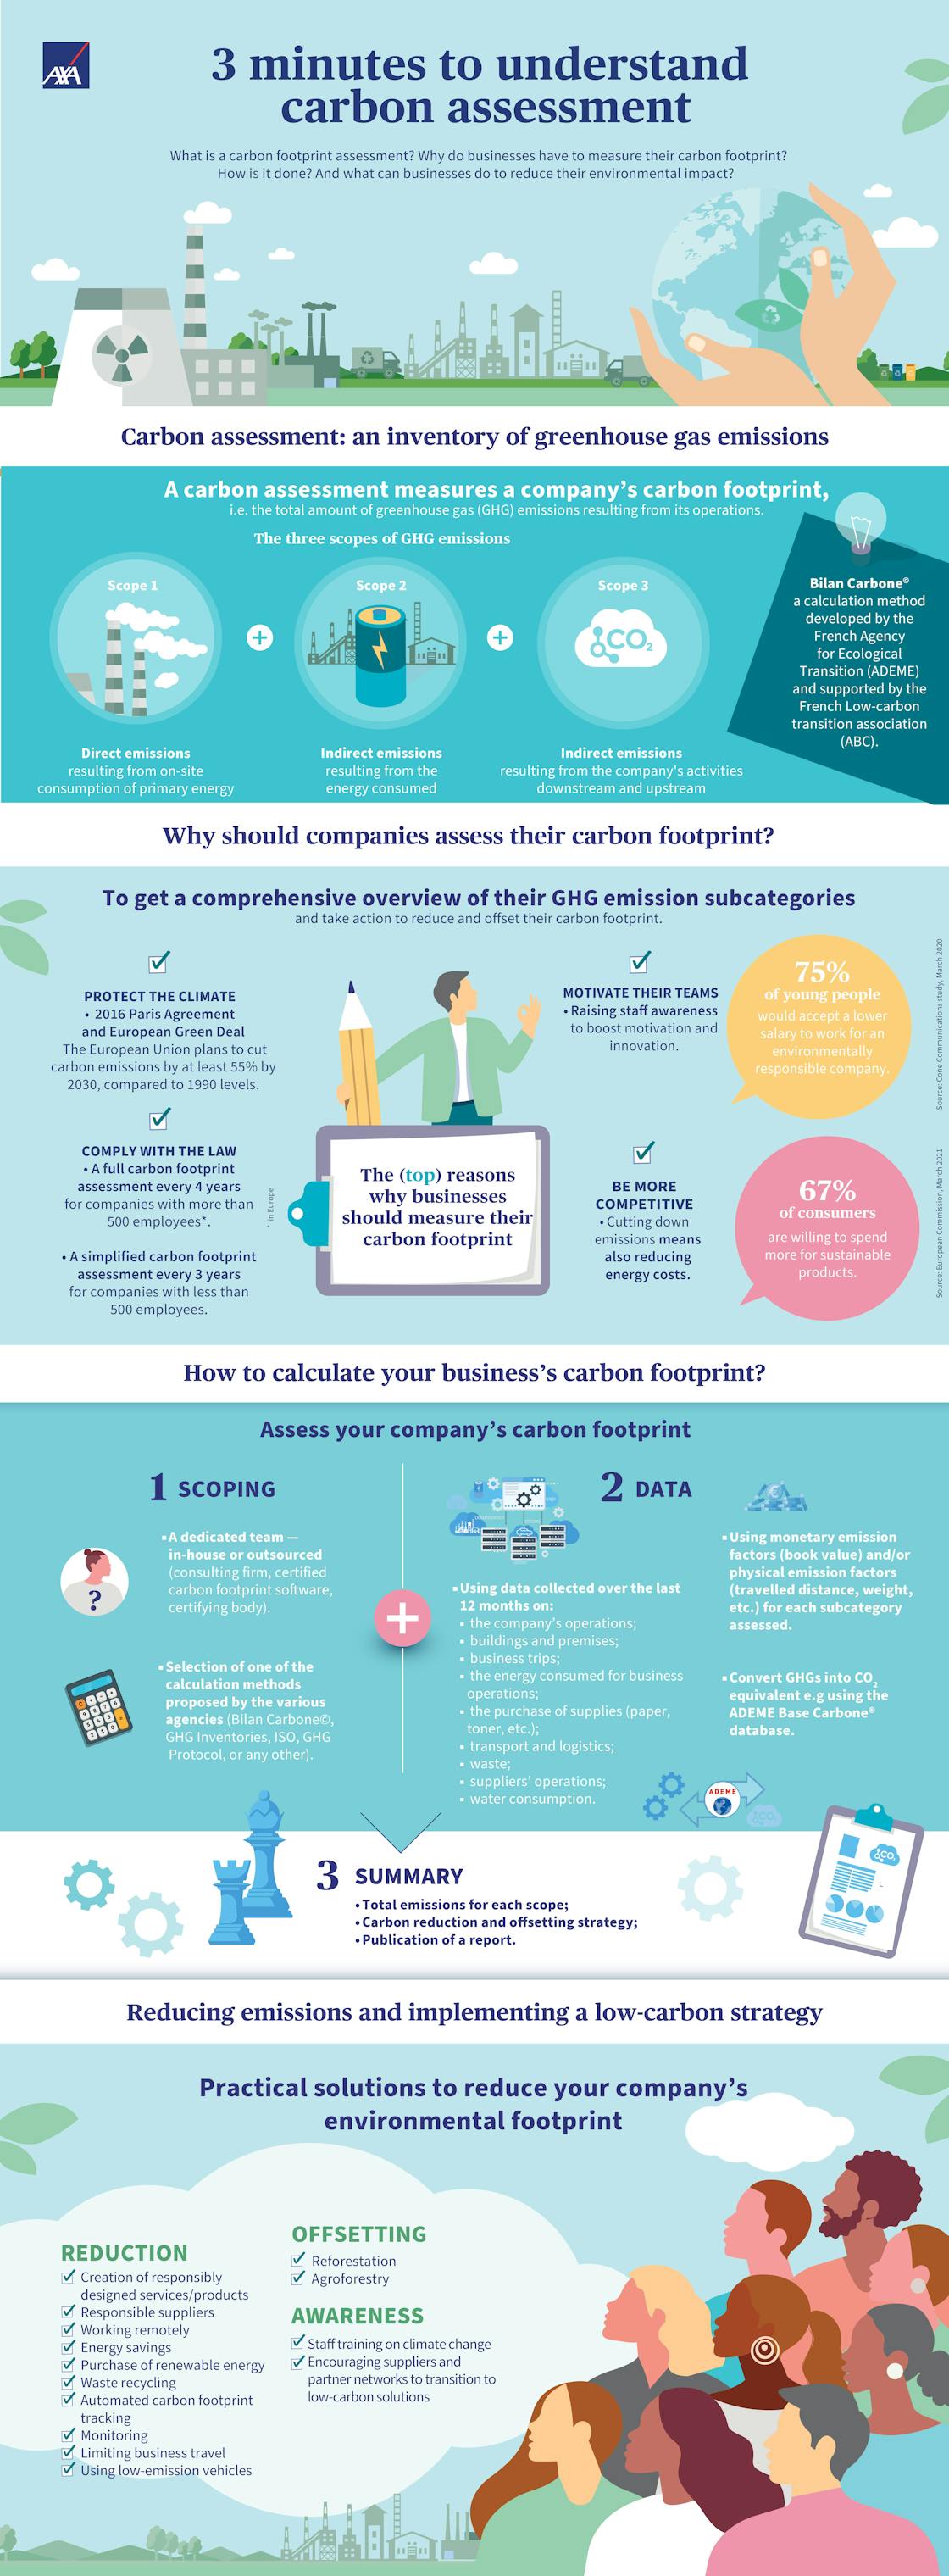 AXA's carbon footprint: reducing greenhouse gases